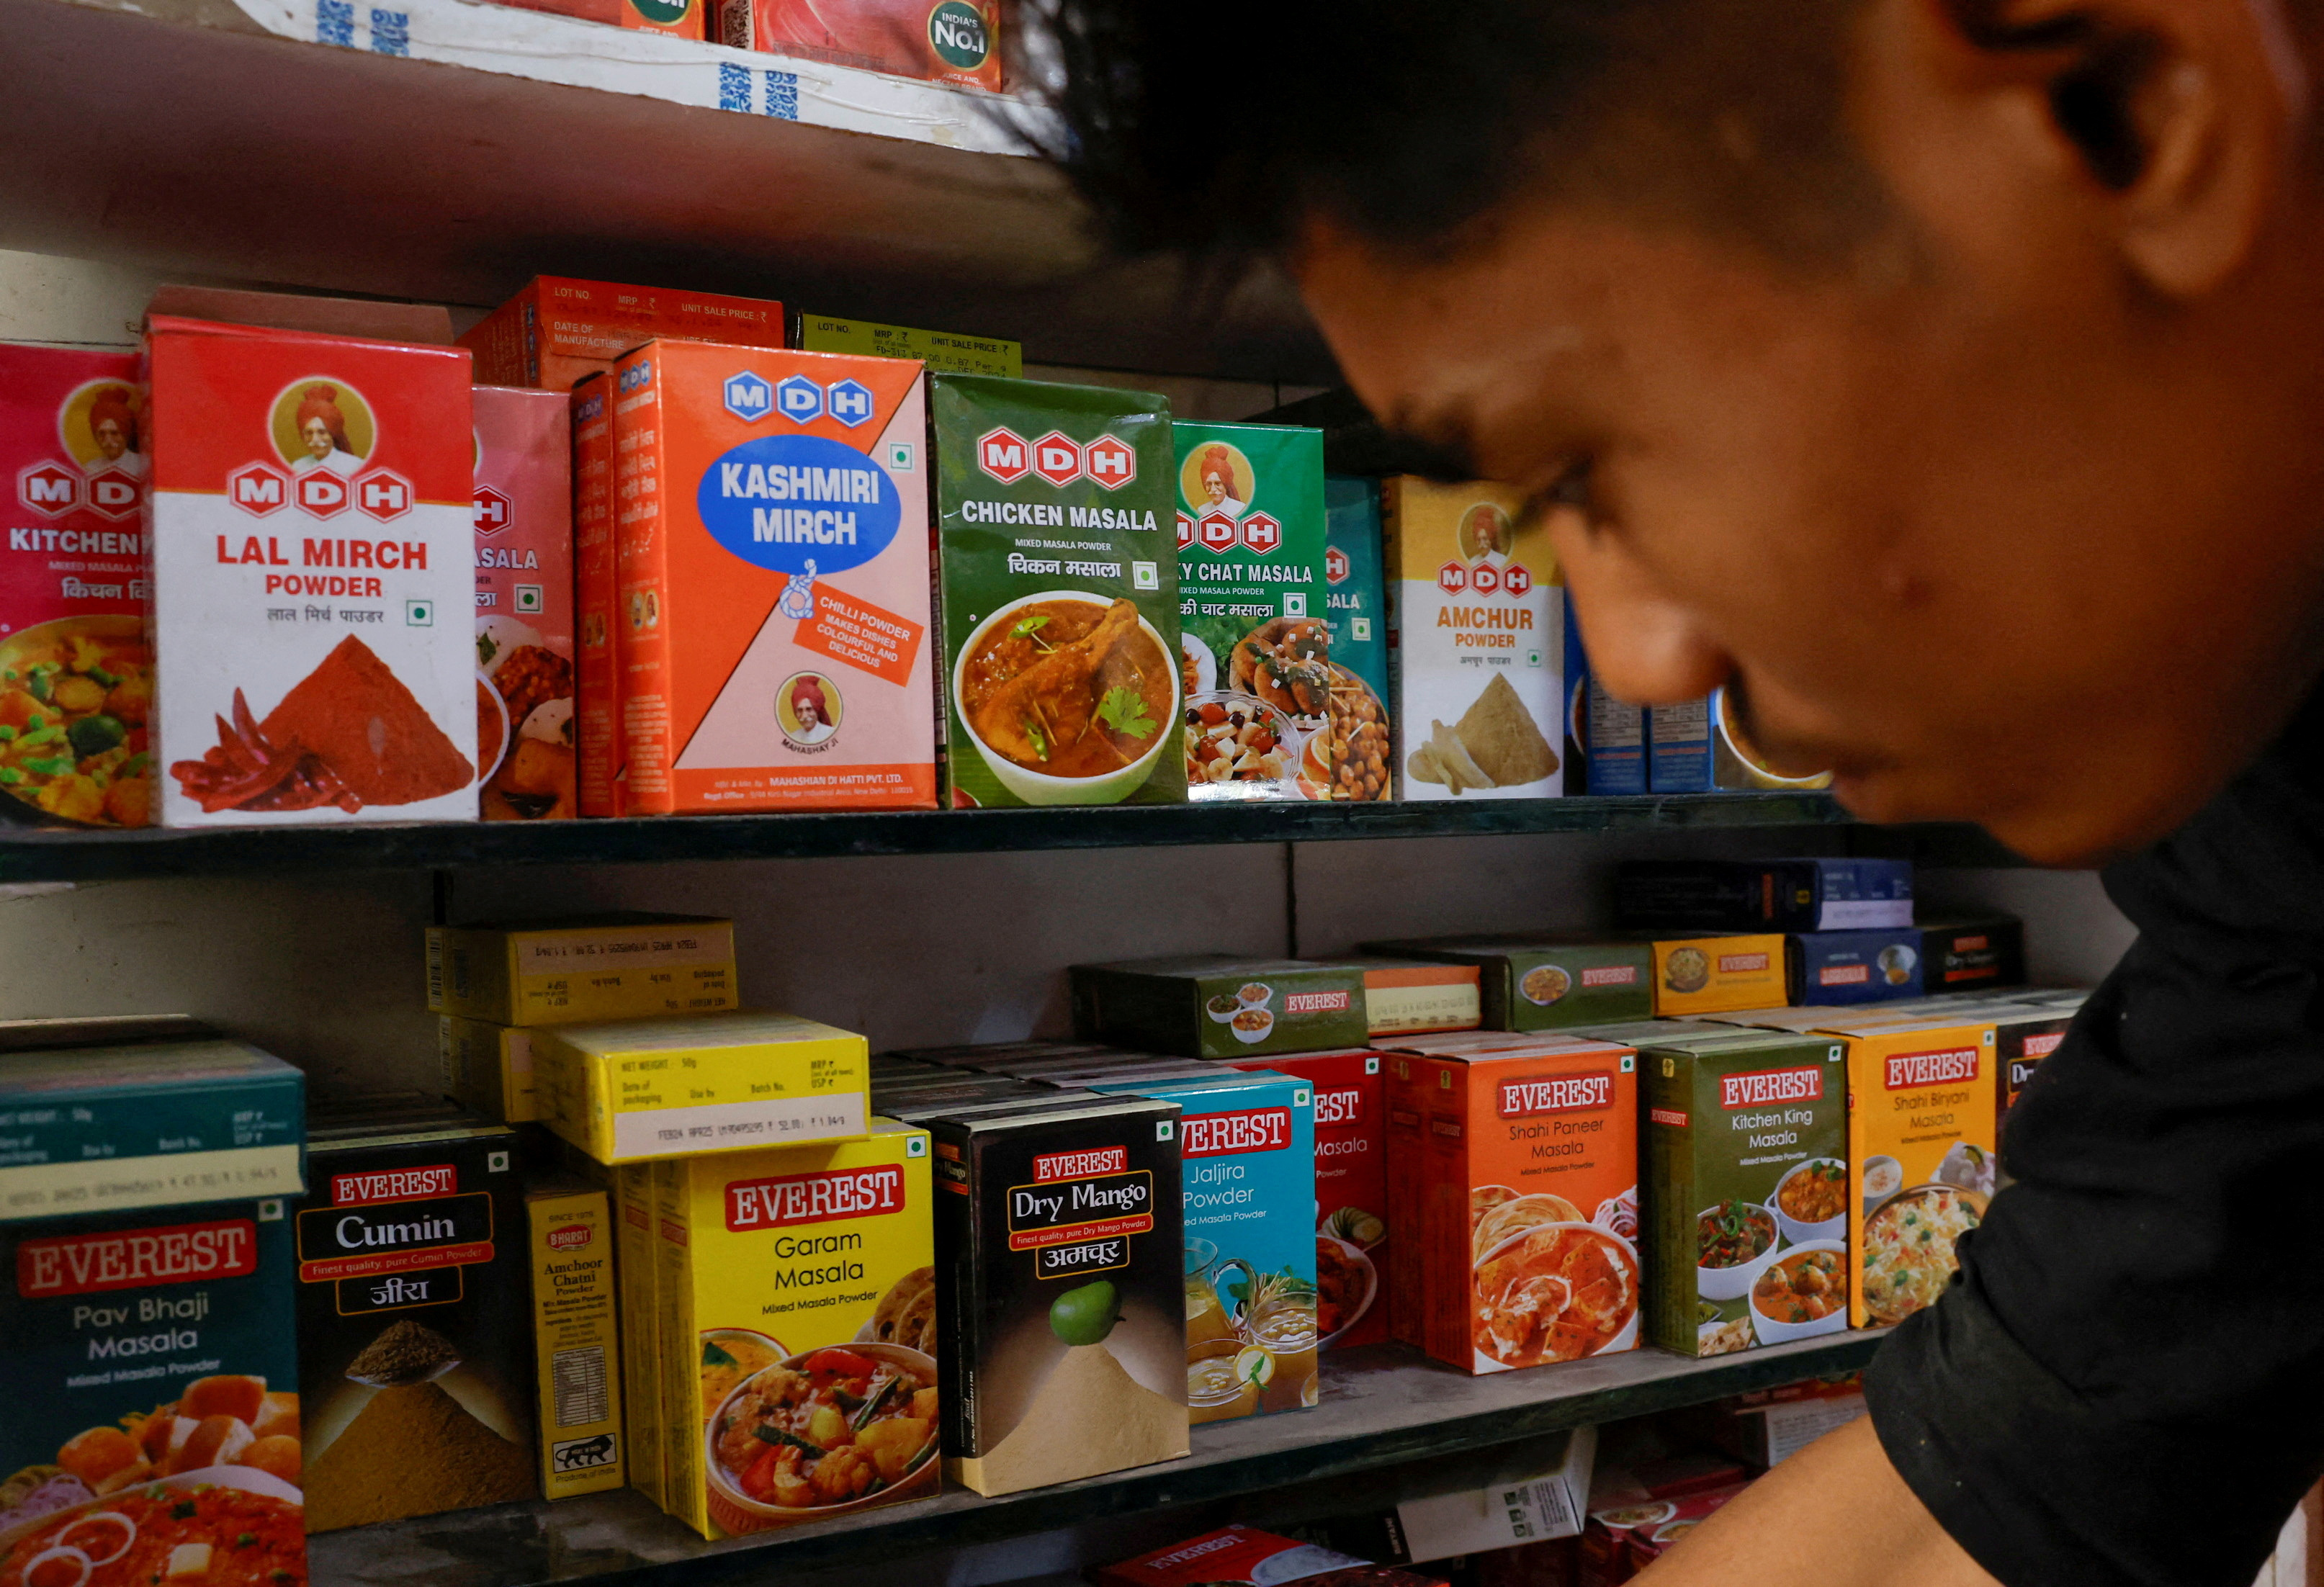 FILE PHOTO: A man stands near the spice boxes of MDH and Everest kept on the shelf of a shop at a market in New Delhi